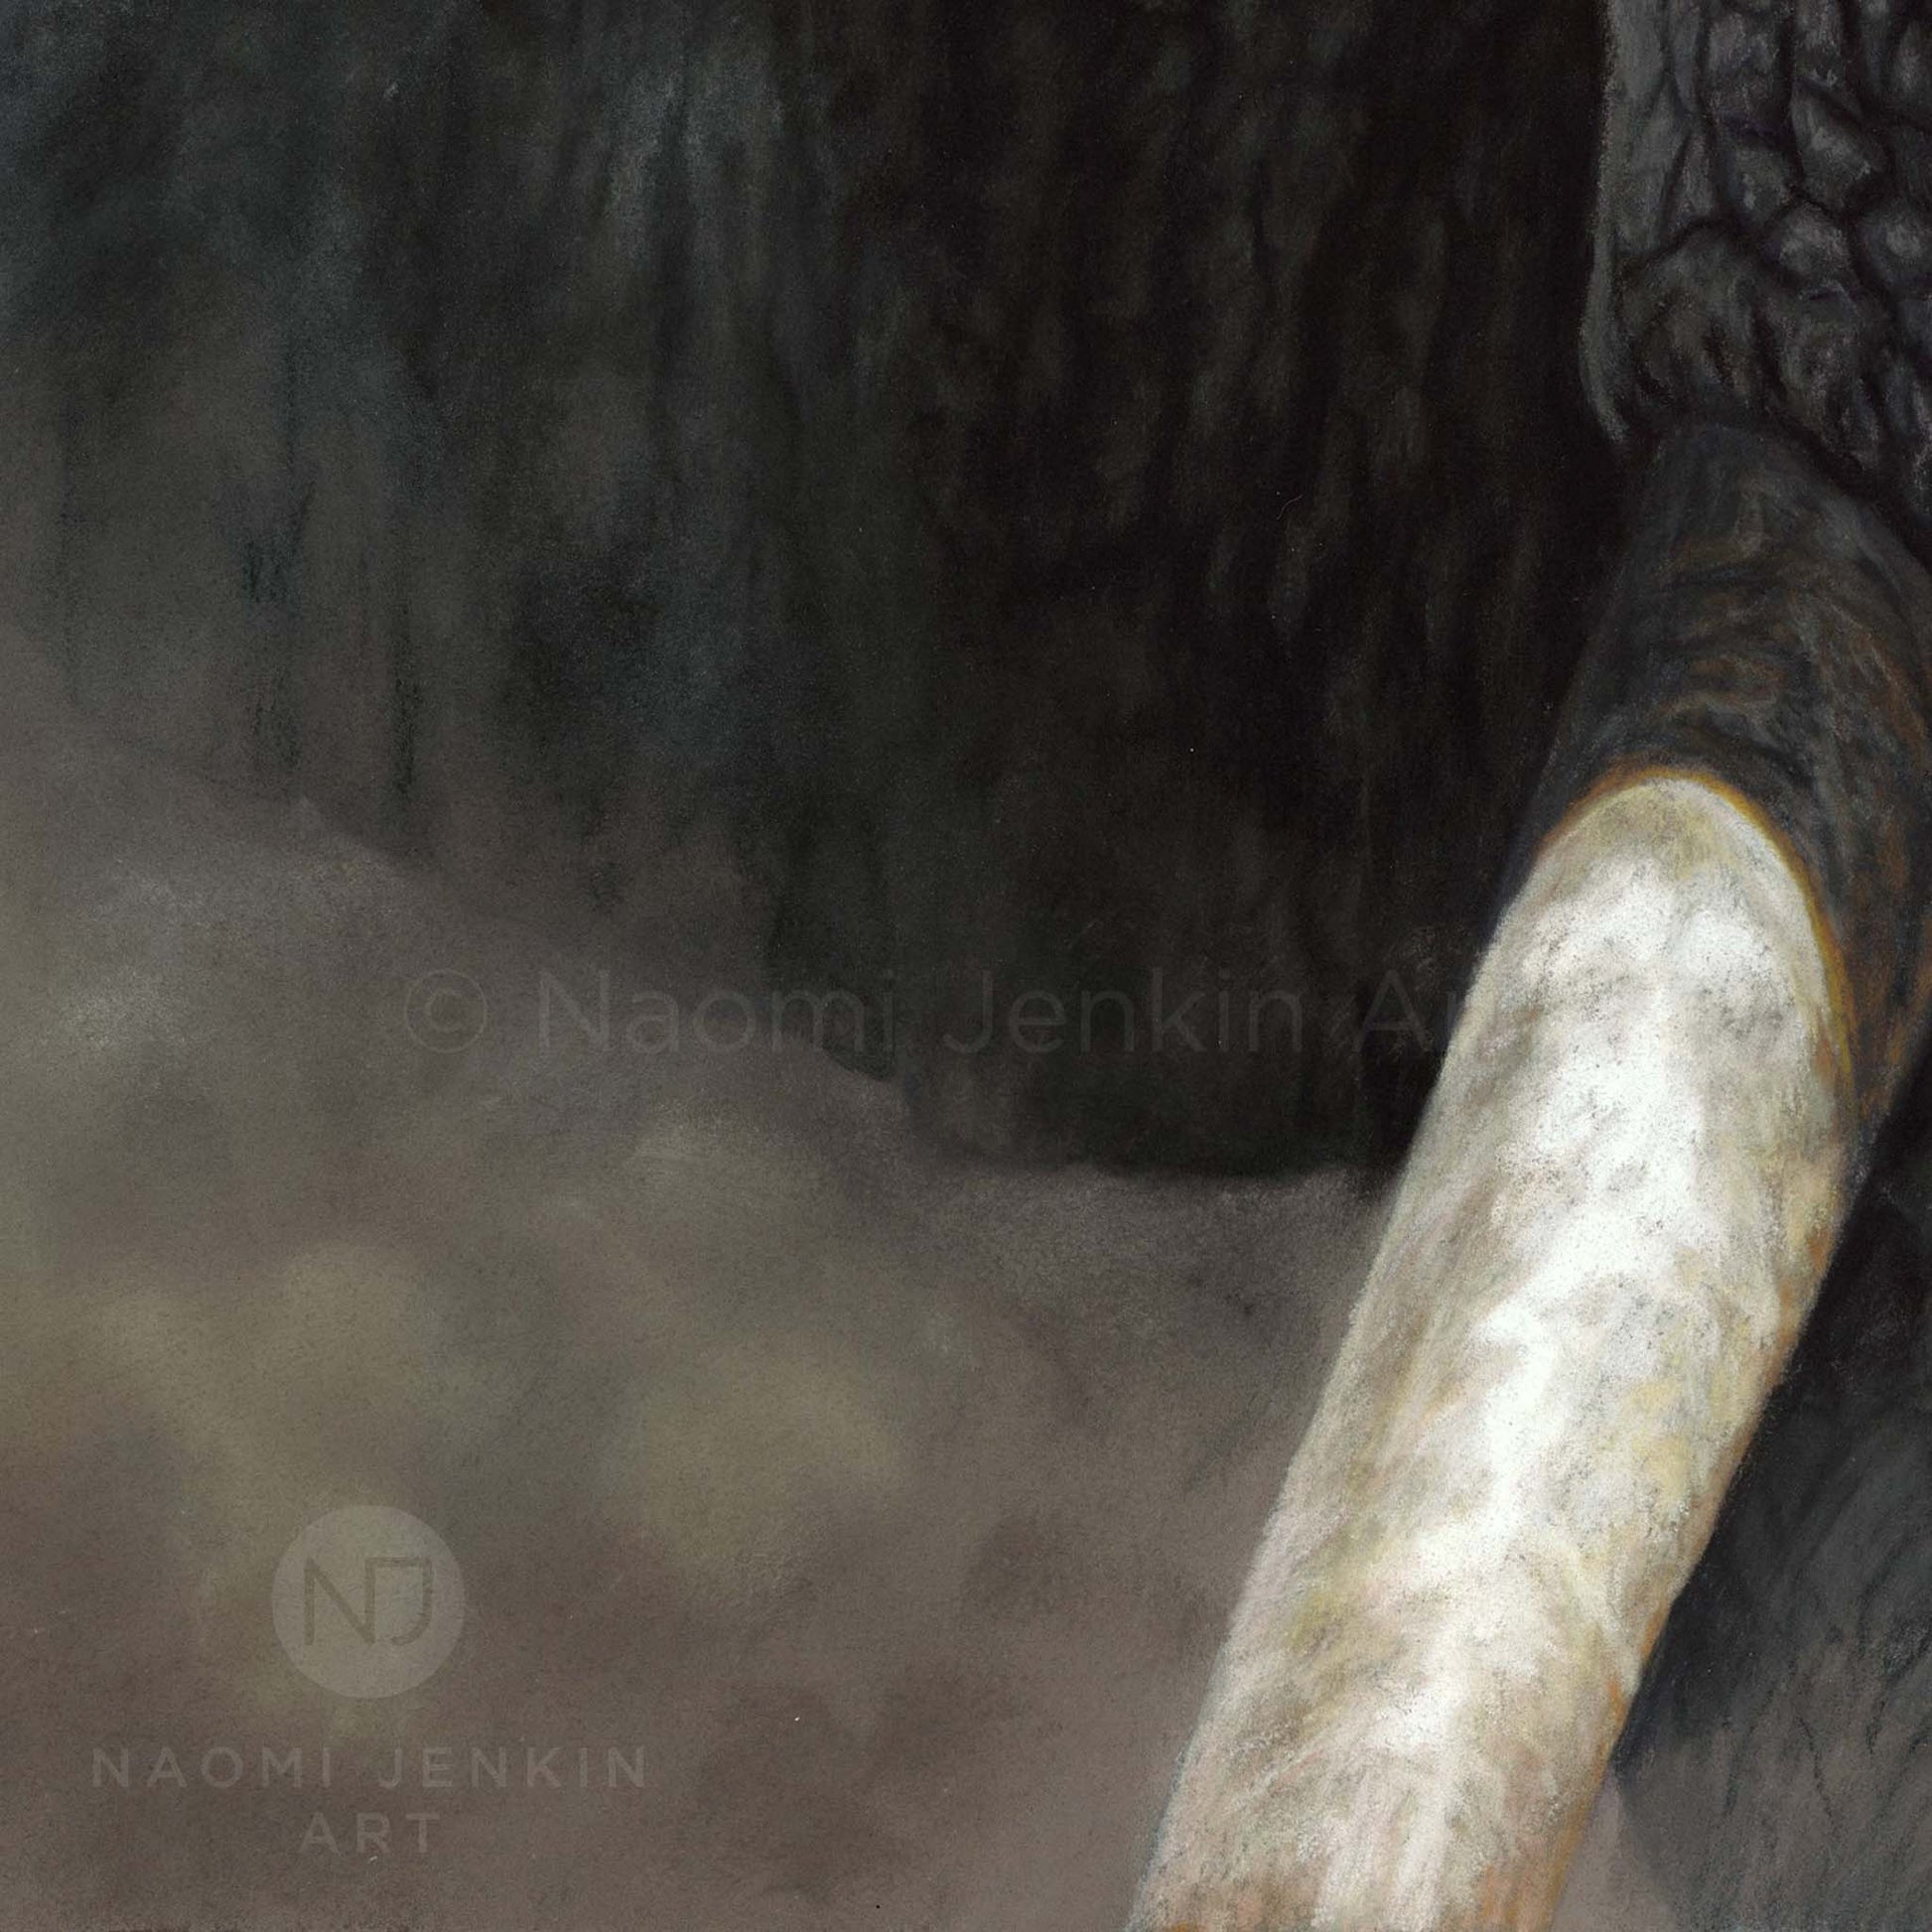 Close up elephant tusk drawing from the print 'The Elephant Charge' by Naomi Jenkin